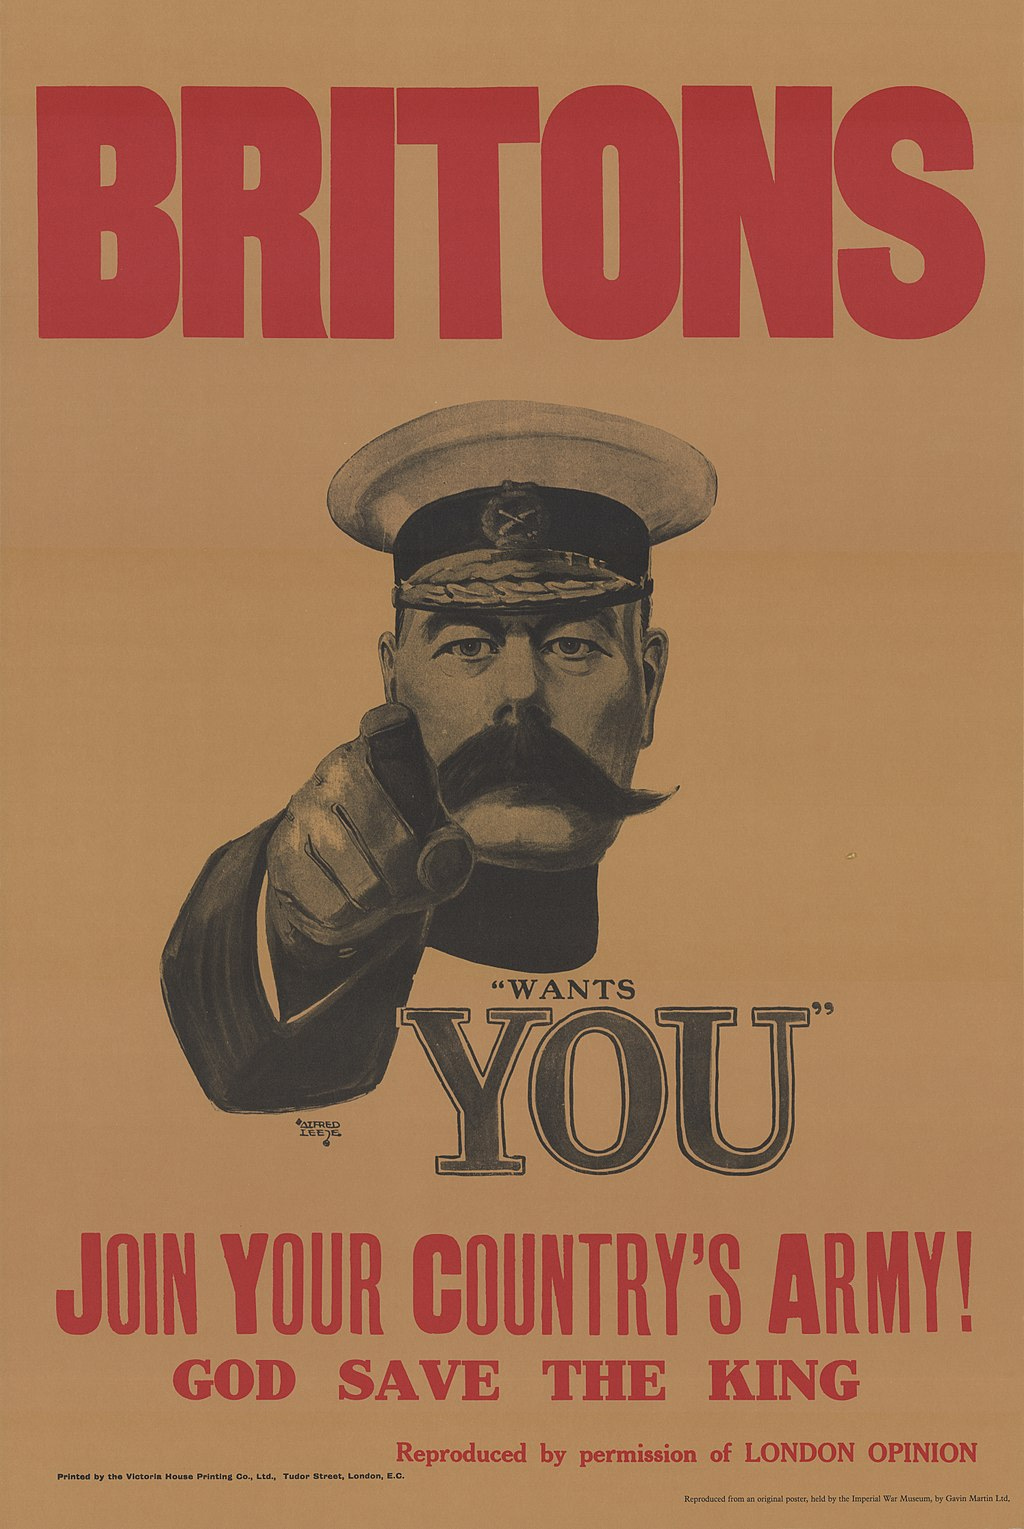 poster of Lord Kitchener from 1914